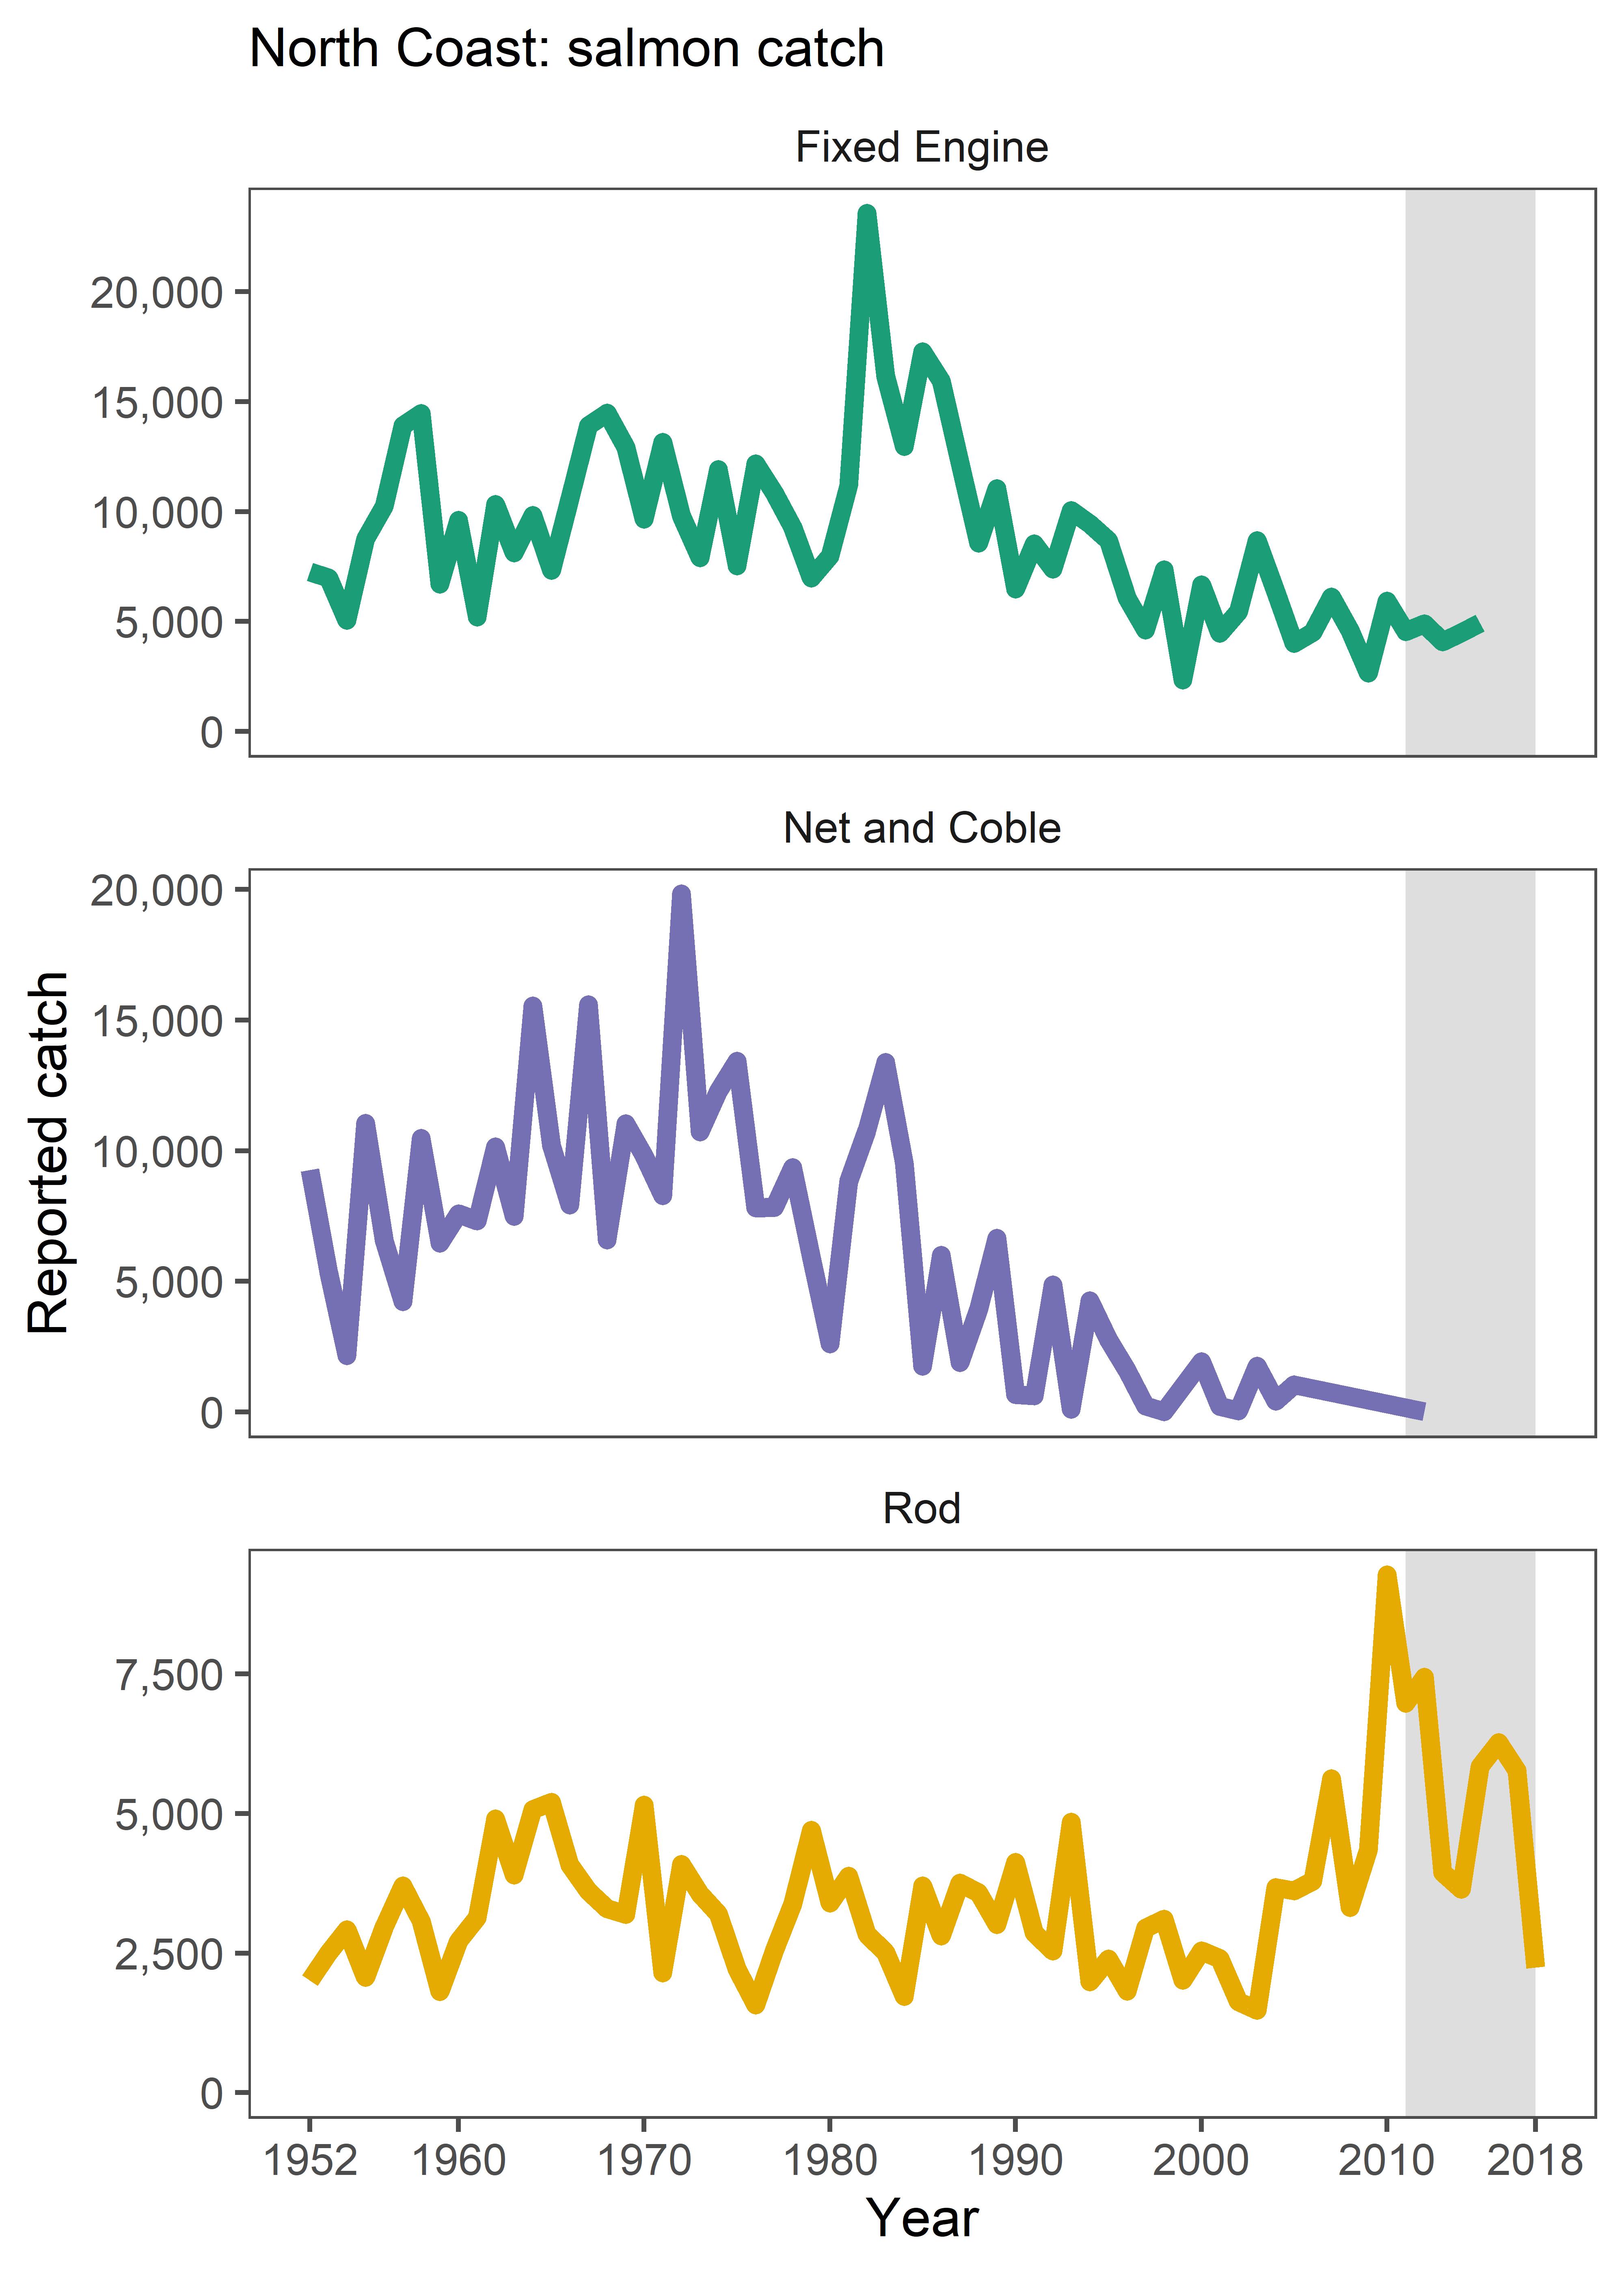 Figure h: Reported catches of salmon from the fixed engine, net and coble and rod fisheries in the North Coast SMR 1952 to 2018.